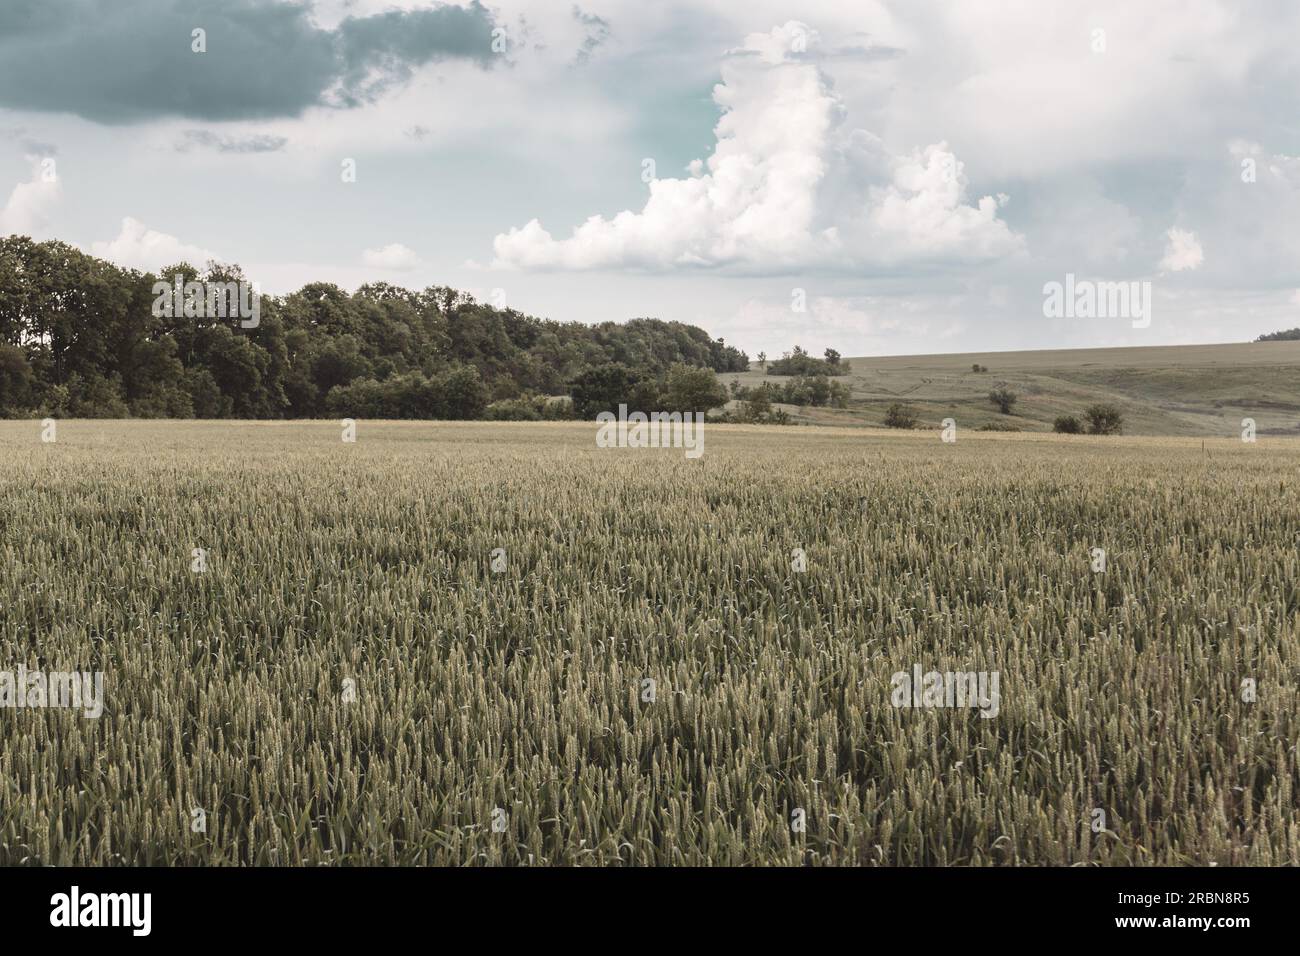 Wheat field landscape with scenic cloudy sky. Barley ears growing with trees in background. Agriculture in Ukraine, color graded Stock Photo